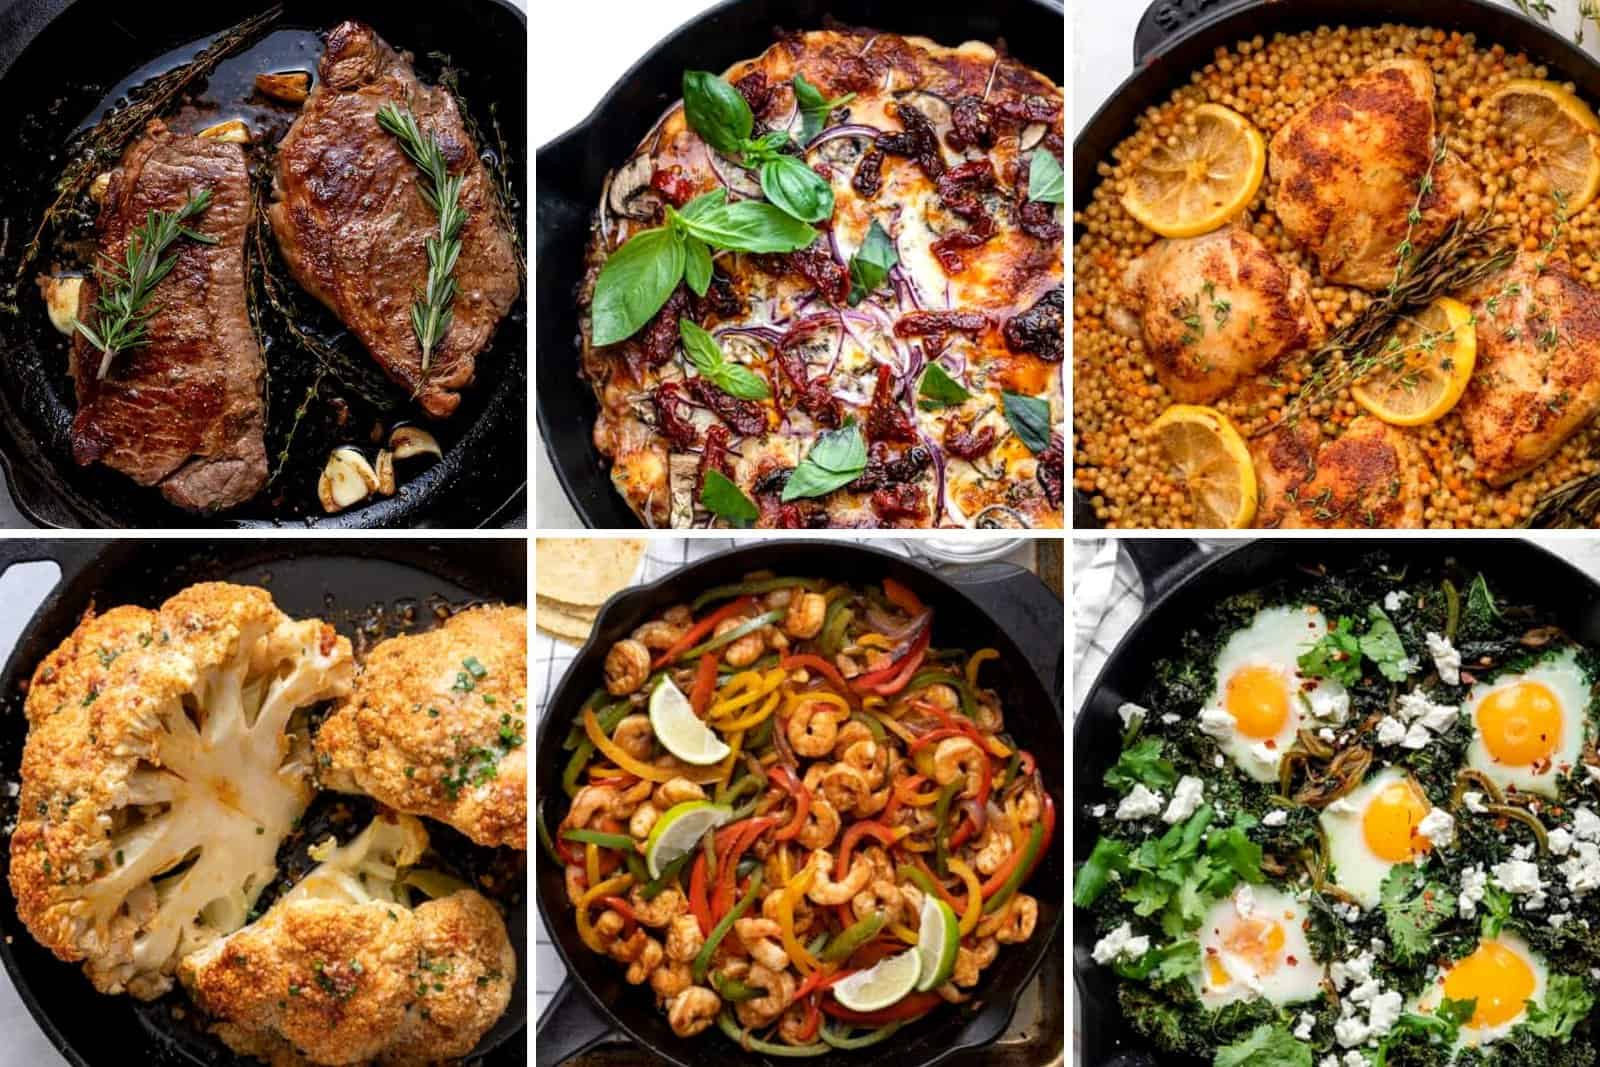 The Best Cast-Iron Skillets of 2023